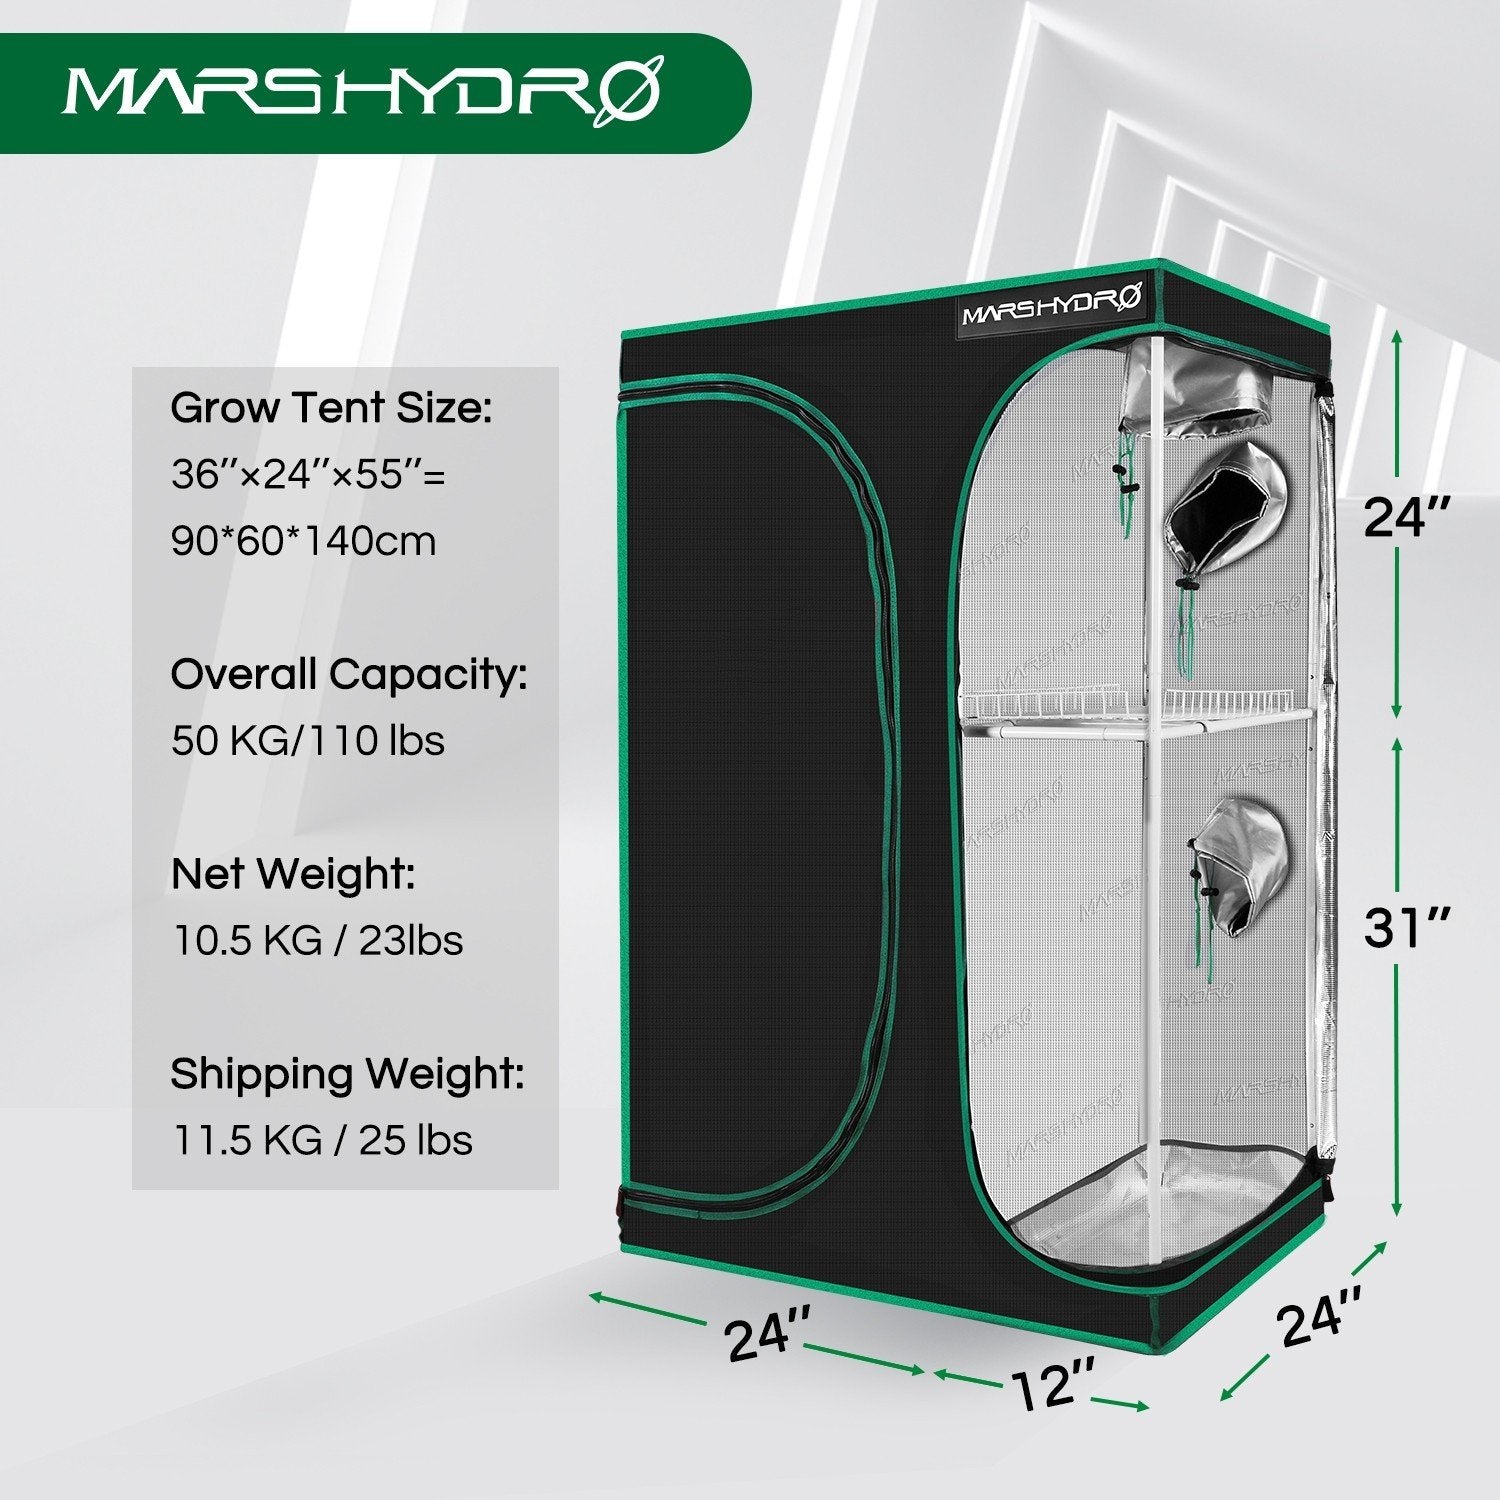 Product Secondary Image:Mars Hydro Grow Tent Kit 3' x 2' x 3' (2in1)